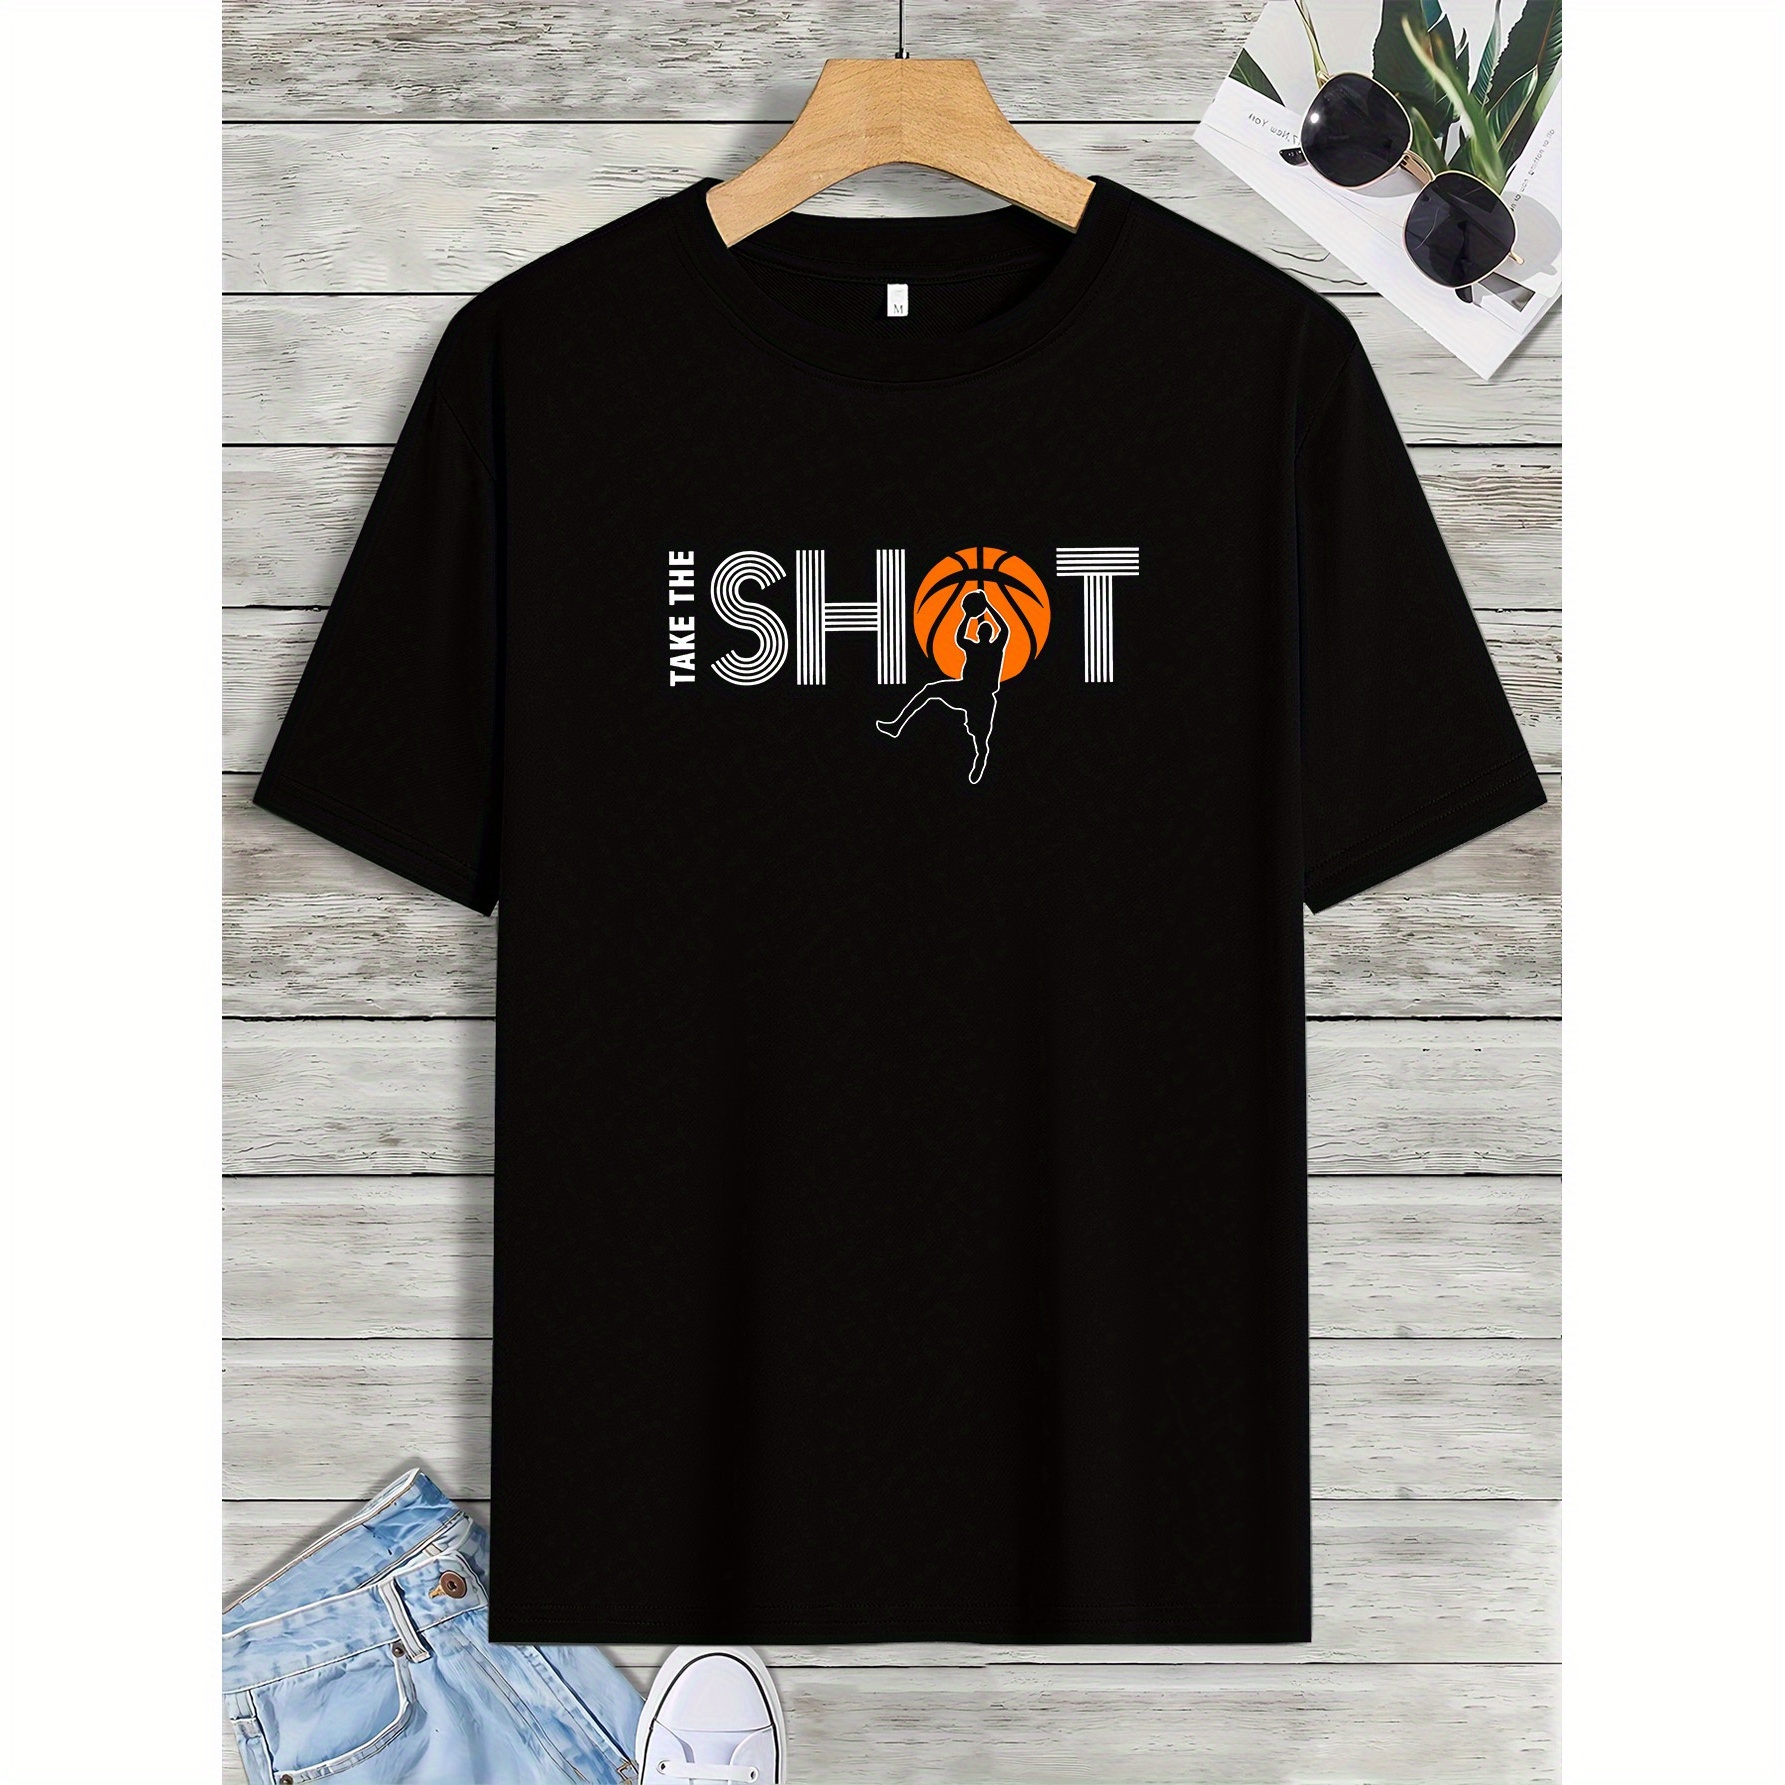 

Take The Shot " Basketball Creative Print Summer Casual T-shirt Short Sleeve For Men, Sporty Leisure Style, Fashion Crew Neck Top For Daily Wear